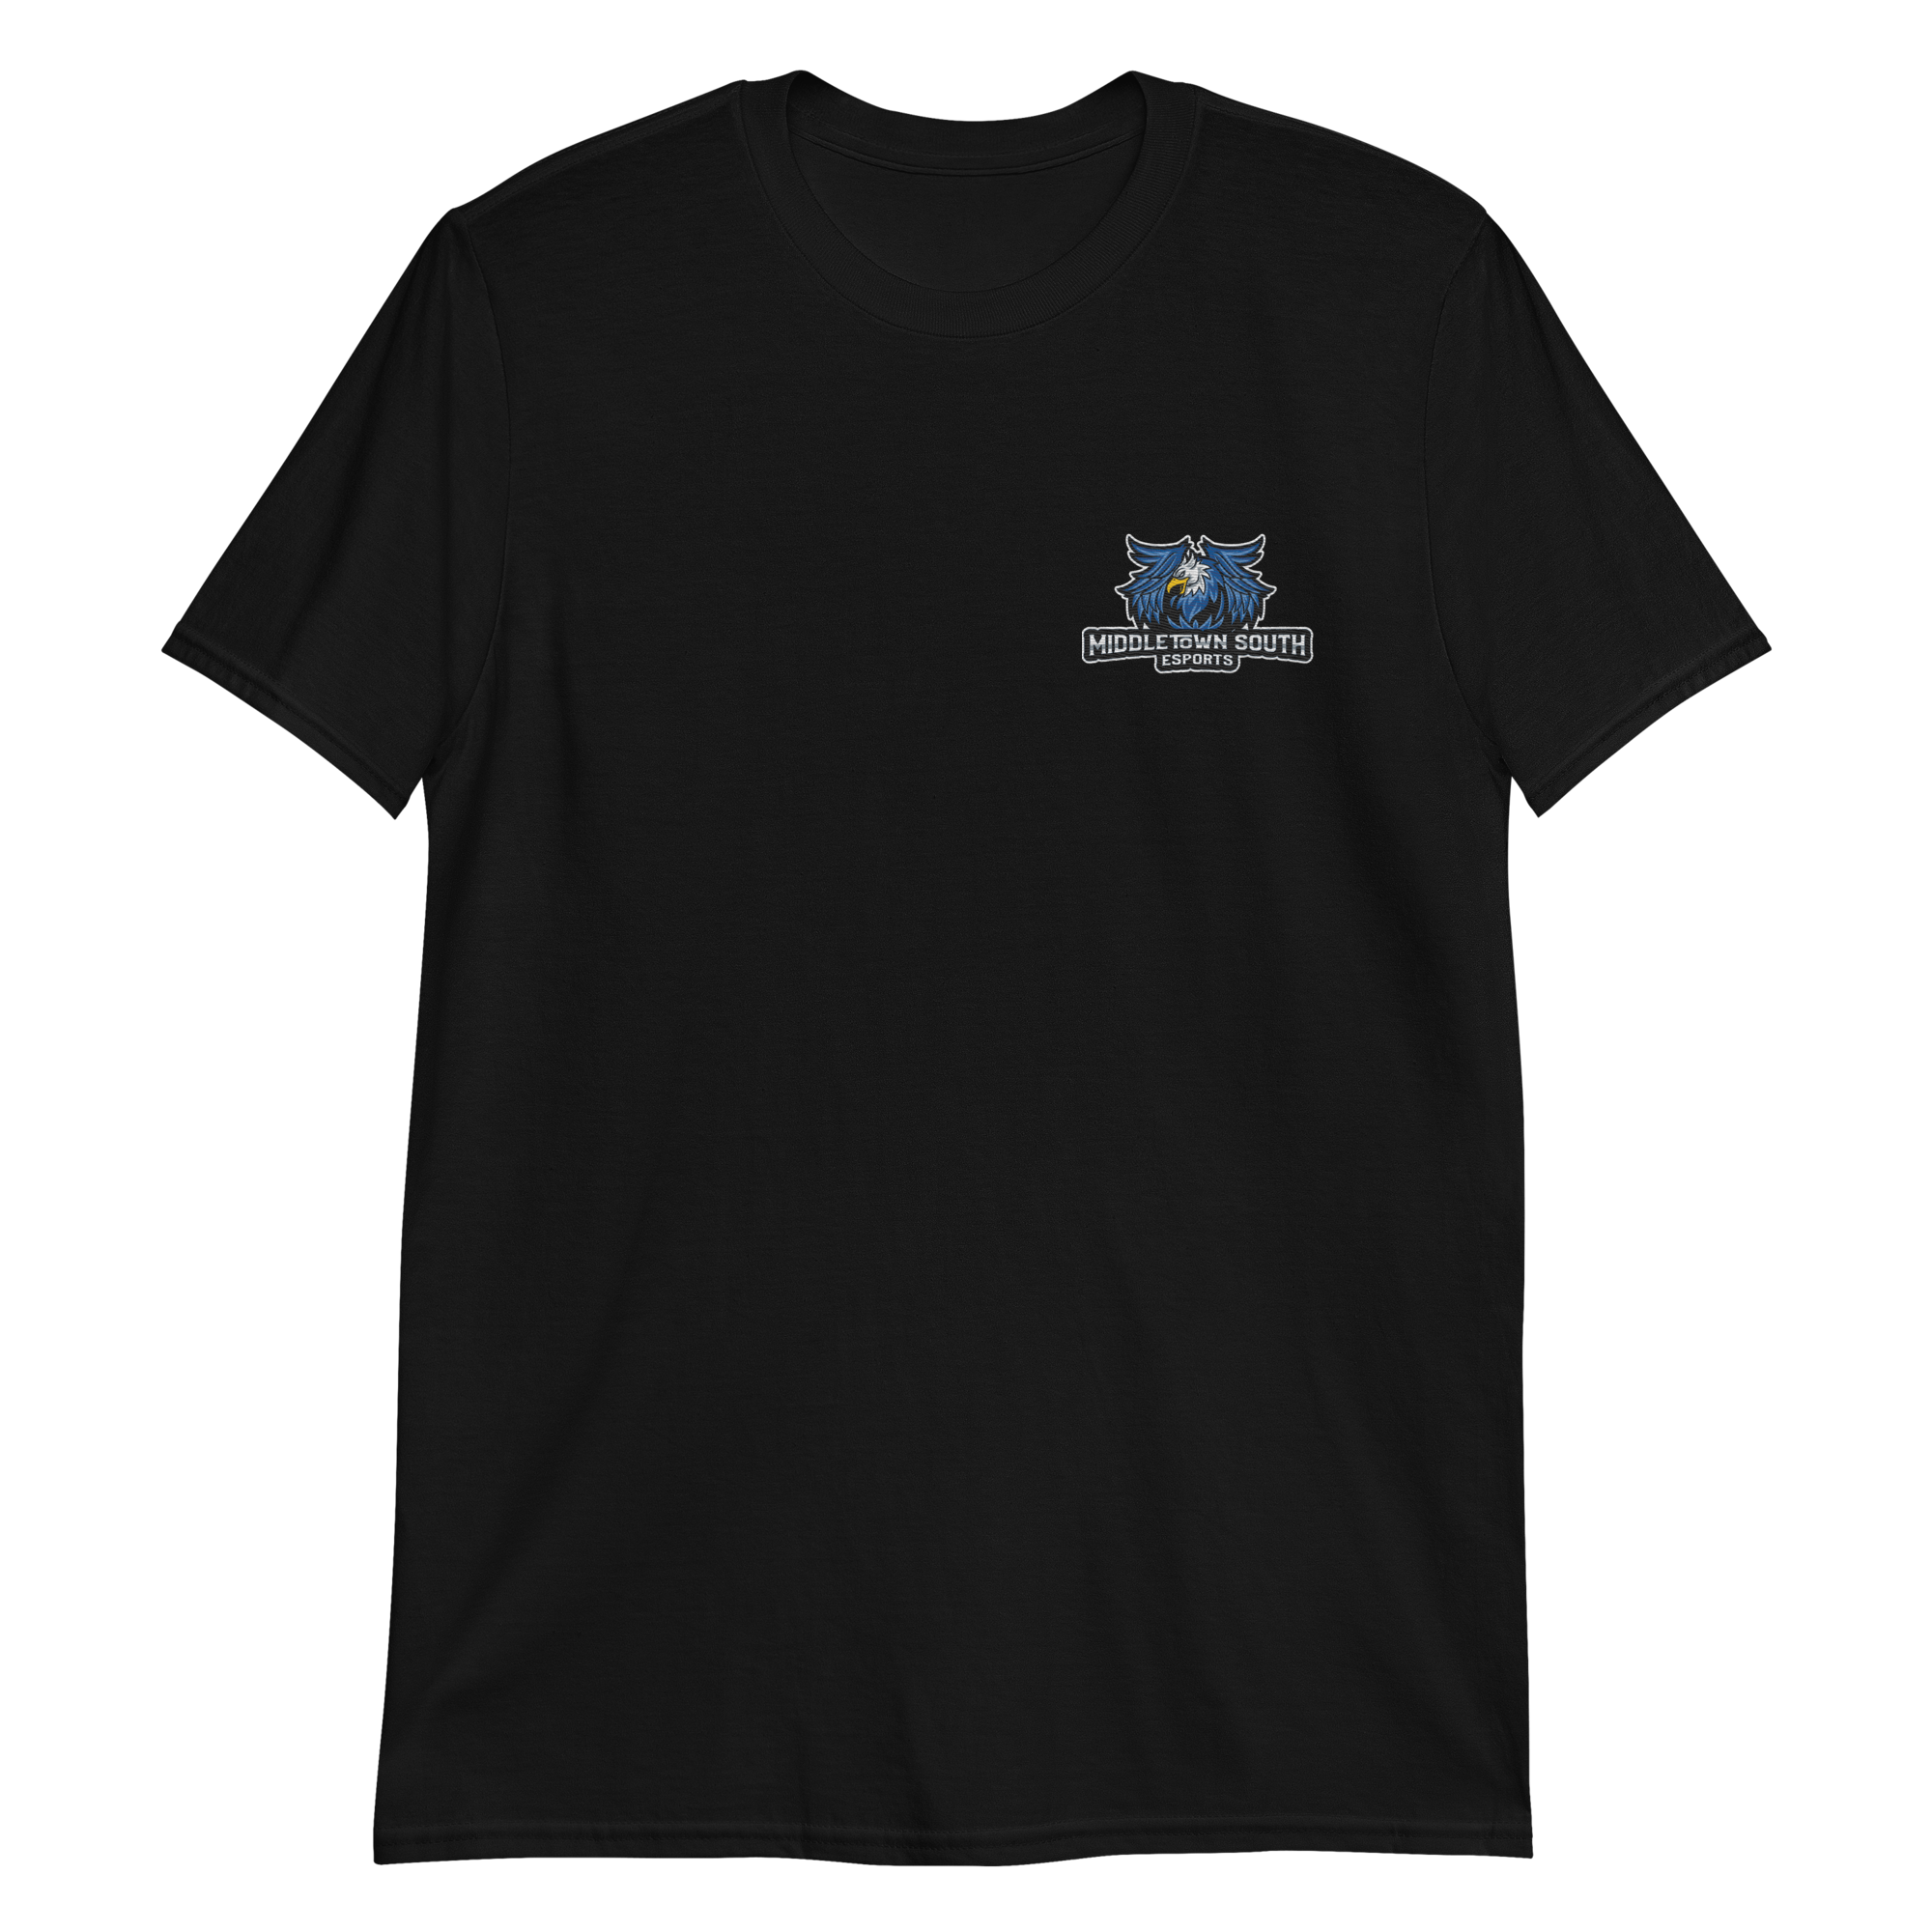 Middletown HS South | On Demand | Embroidered Short-Sleeve Unisex T-Shirt